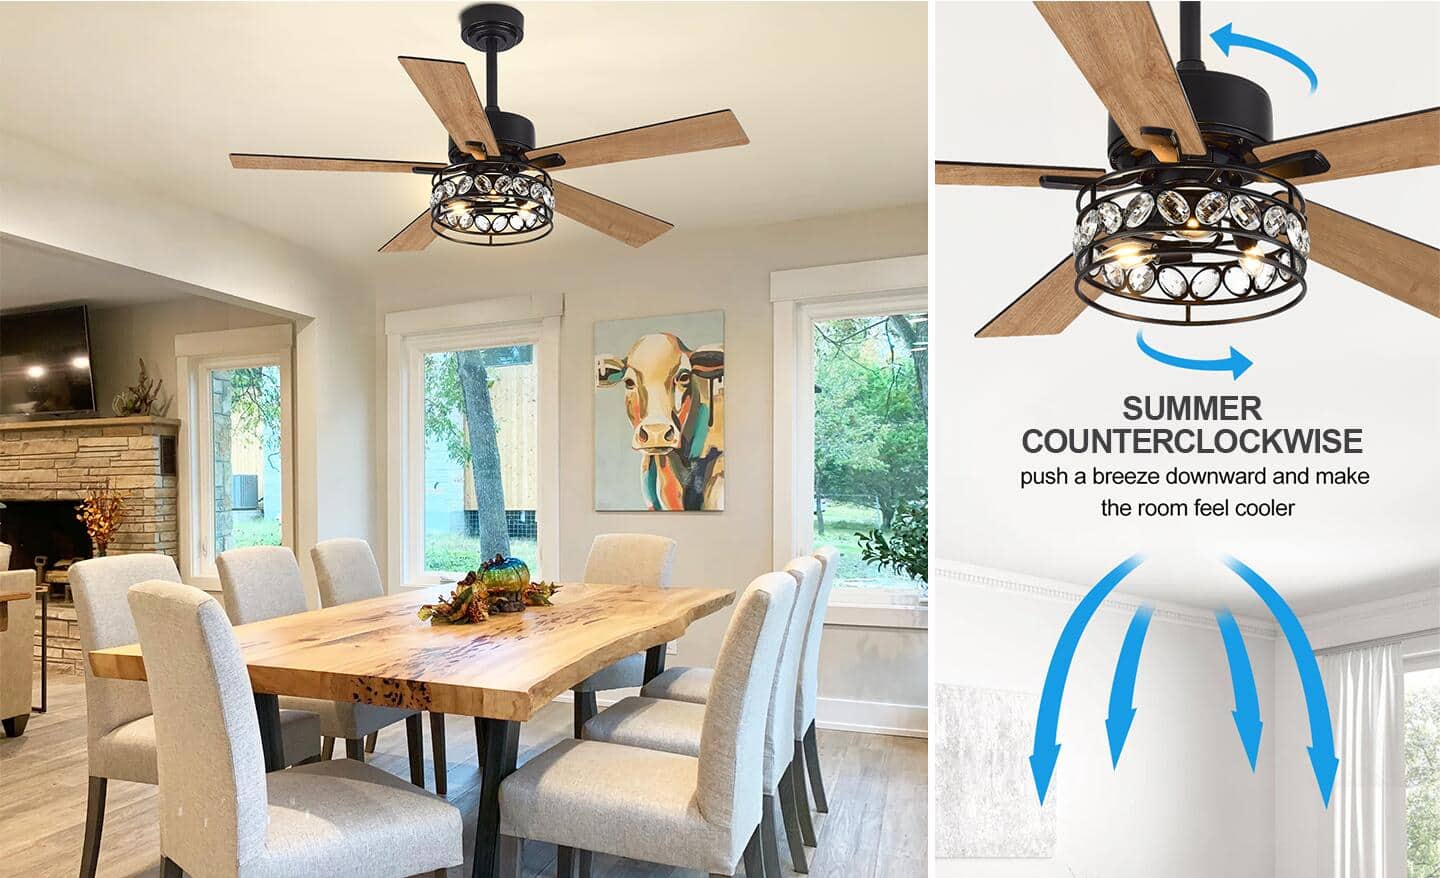 Cool it Down or Turn Up the Heat? The Pros and Cons of Different Summer Cooling Methods - Ceiling Fans